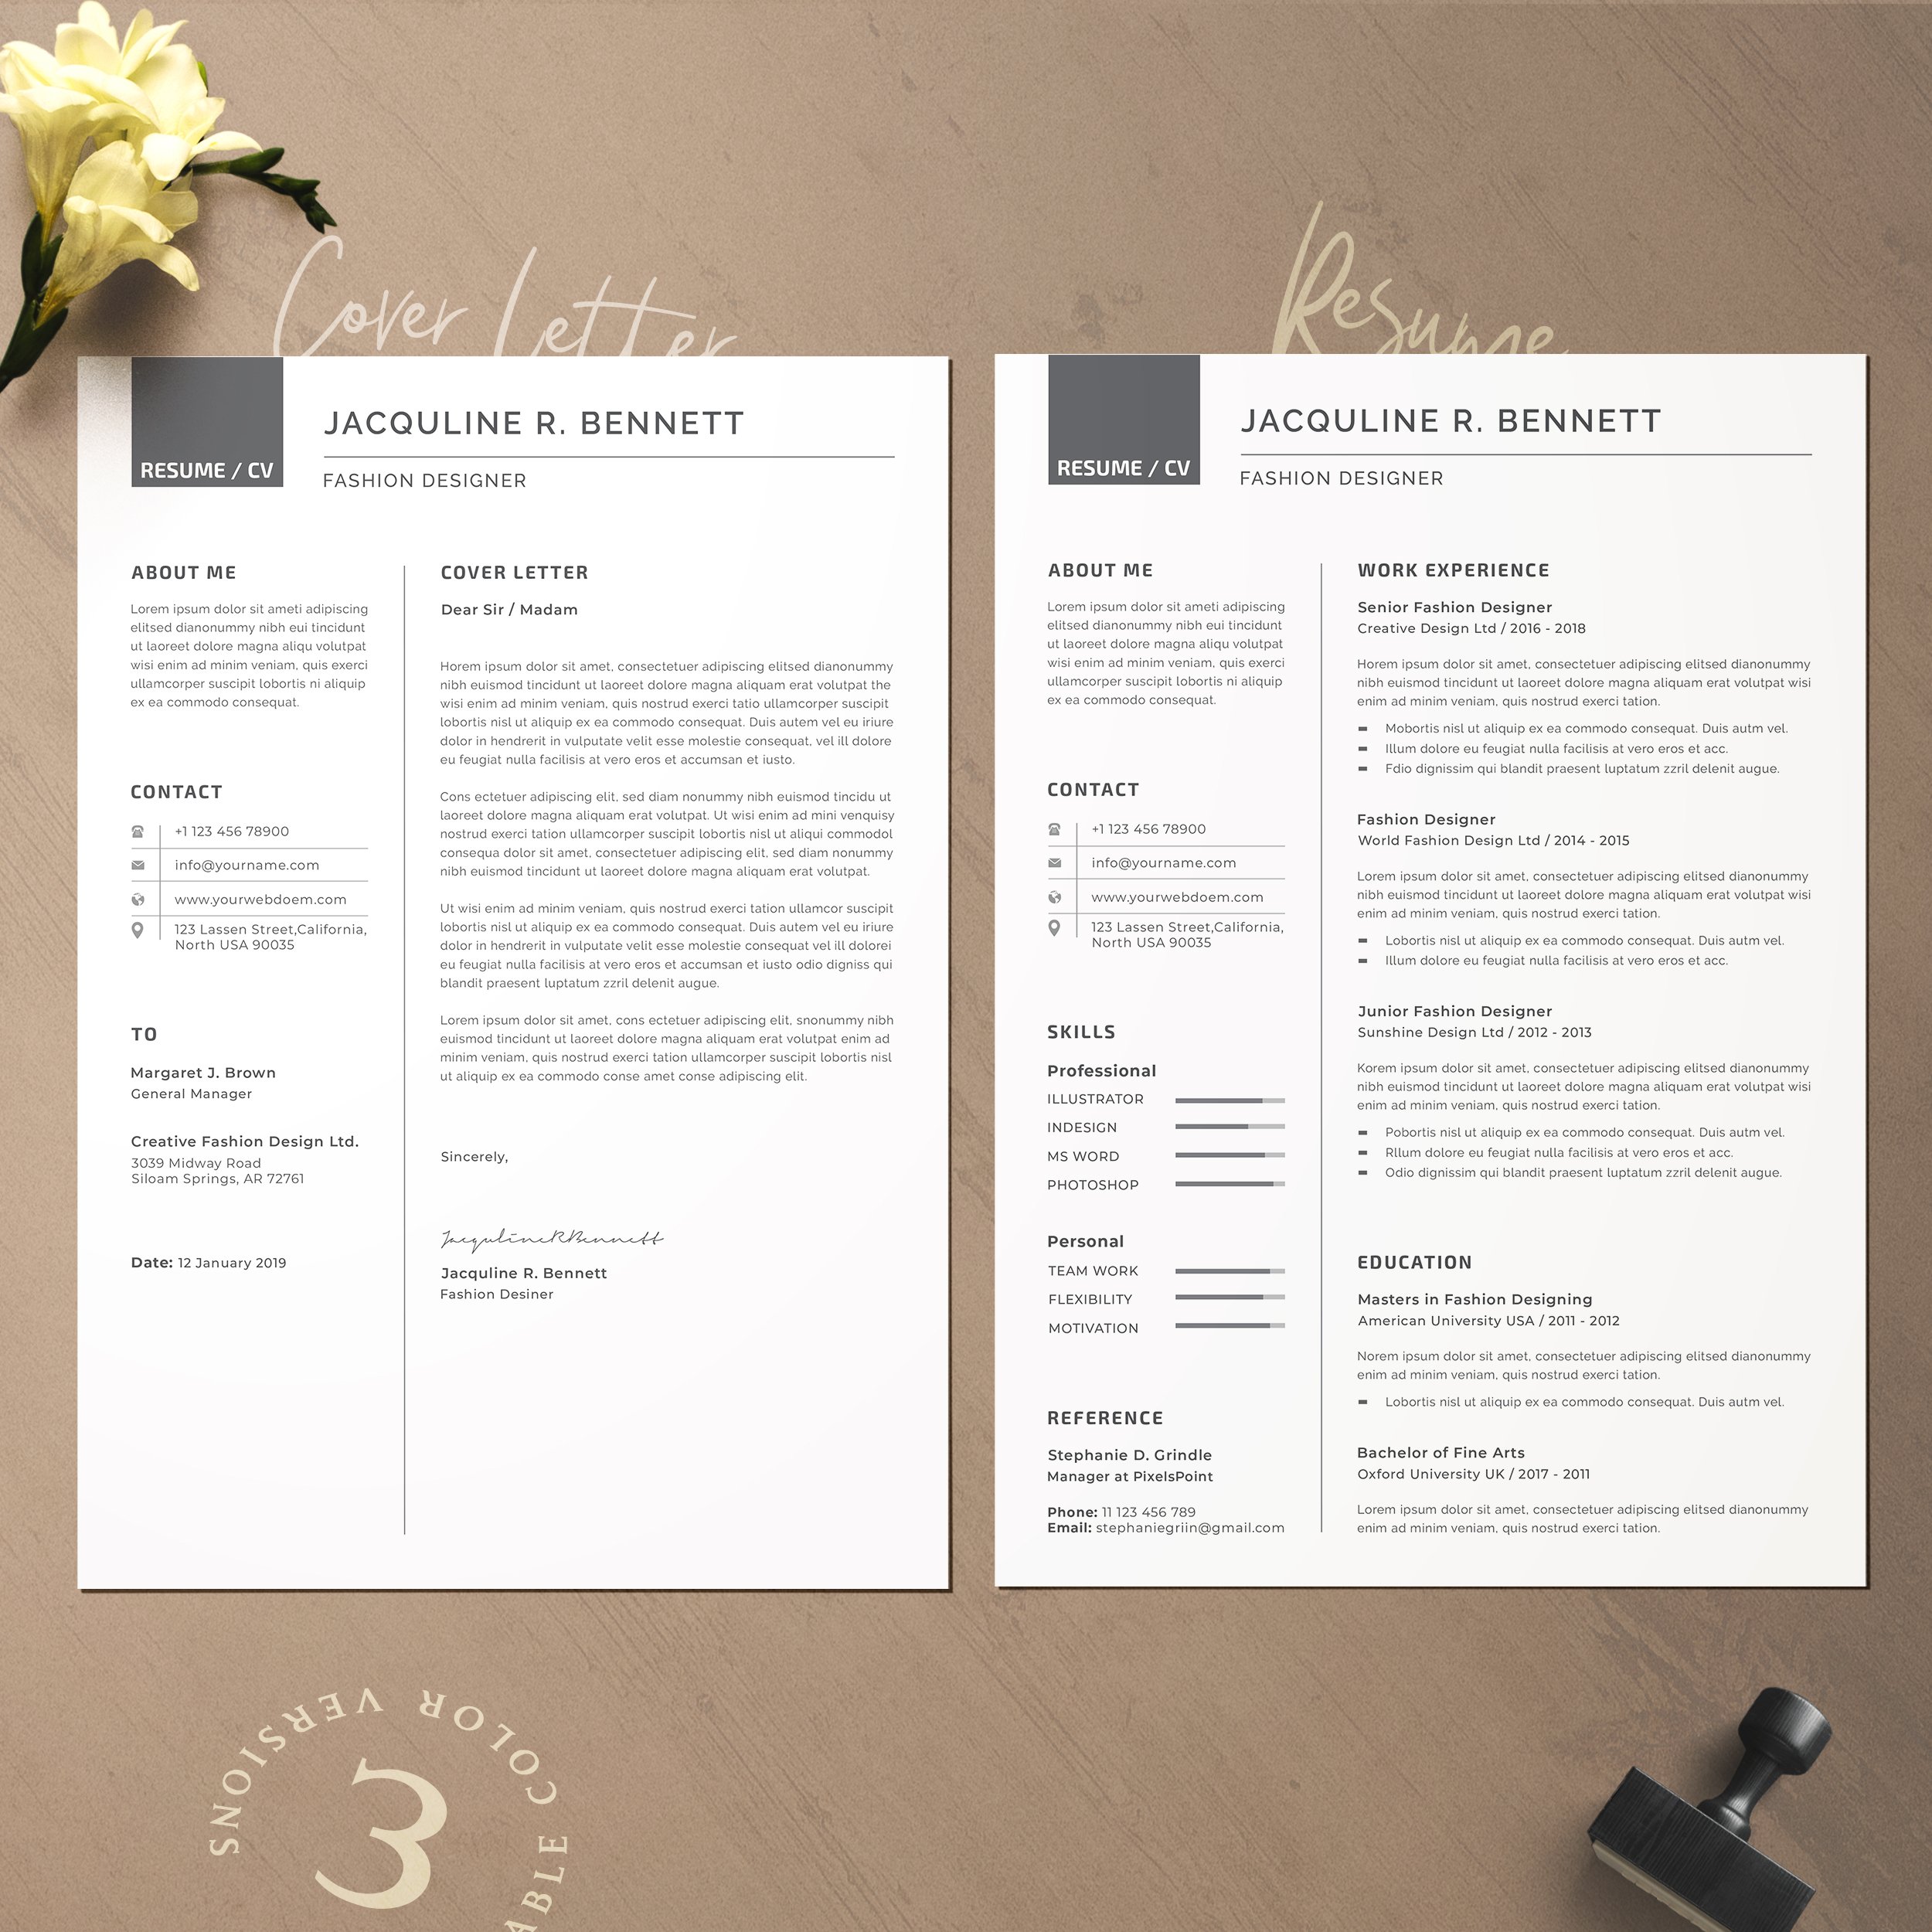 Two professional resume templates on a table.